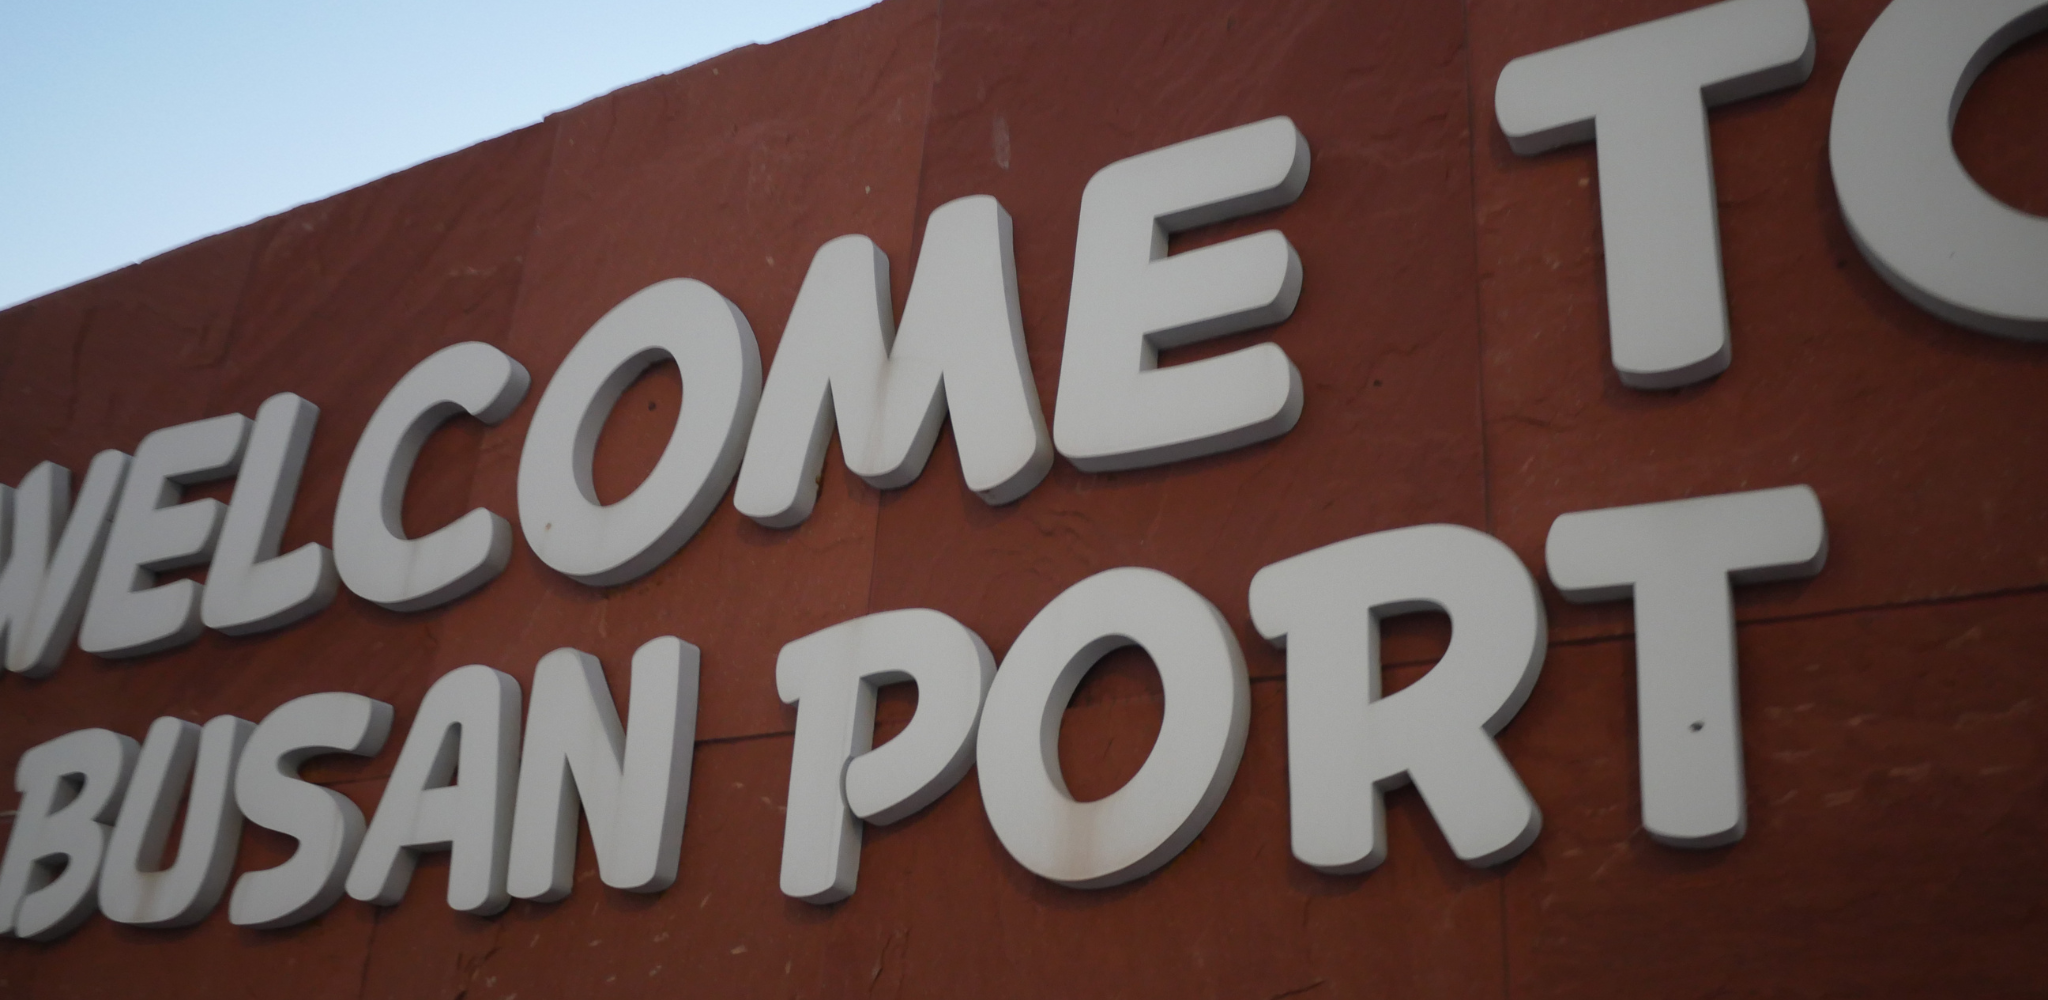 Welcome to Busan port sign